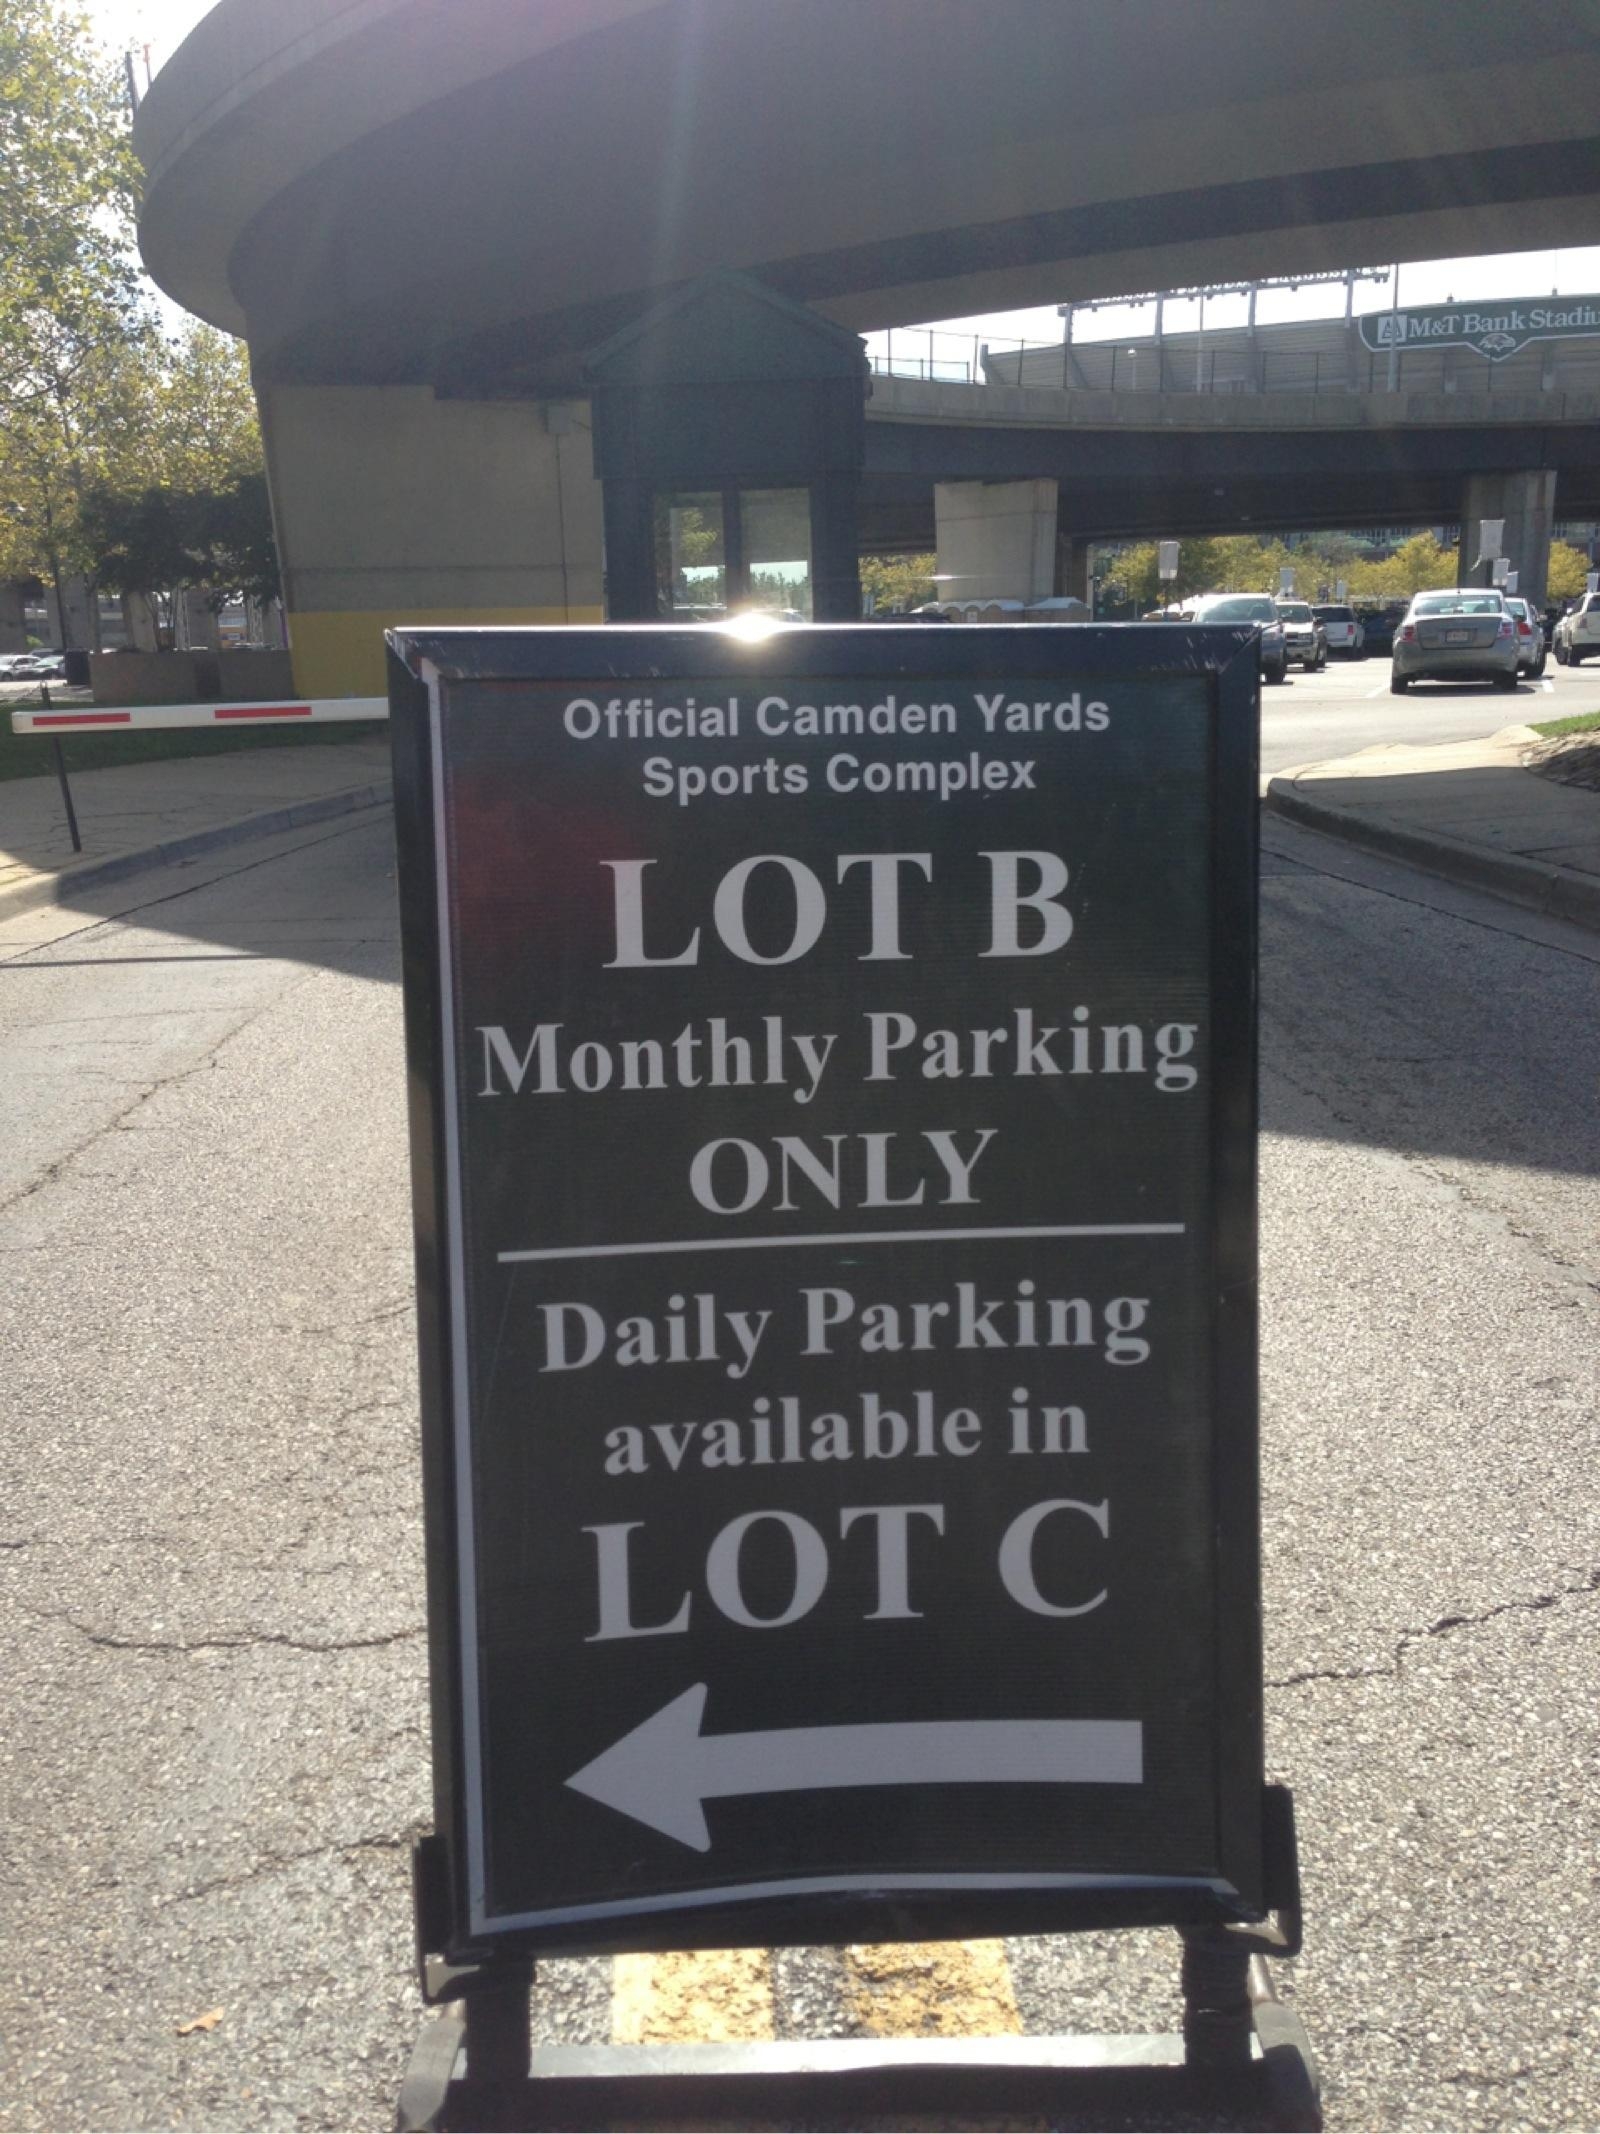 Official Camden Yards Sports Complex Lot B/C Parking in Baltimore